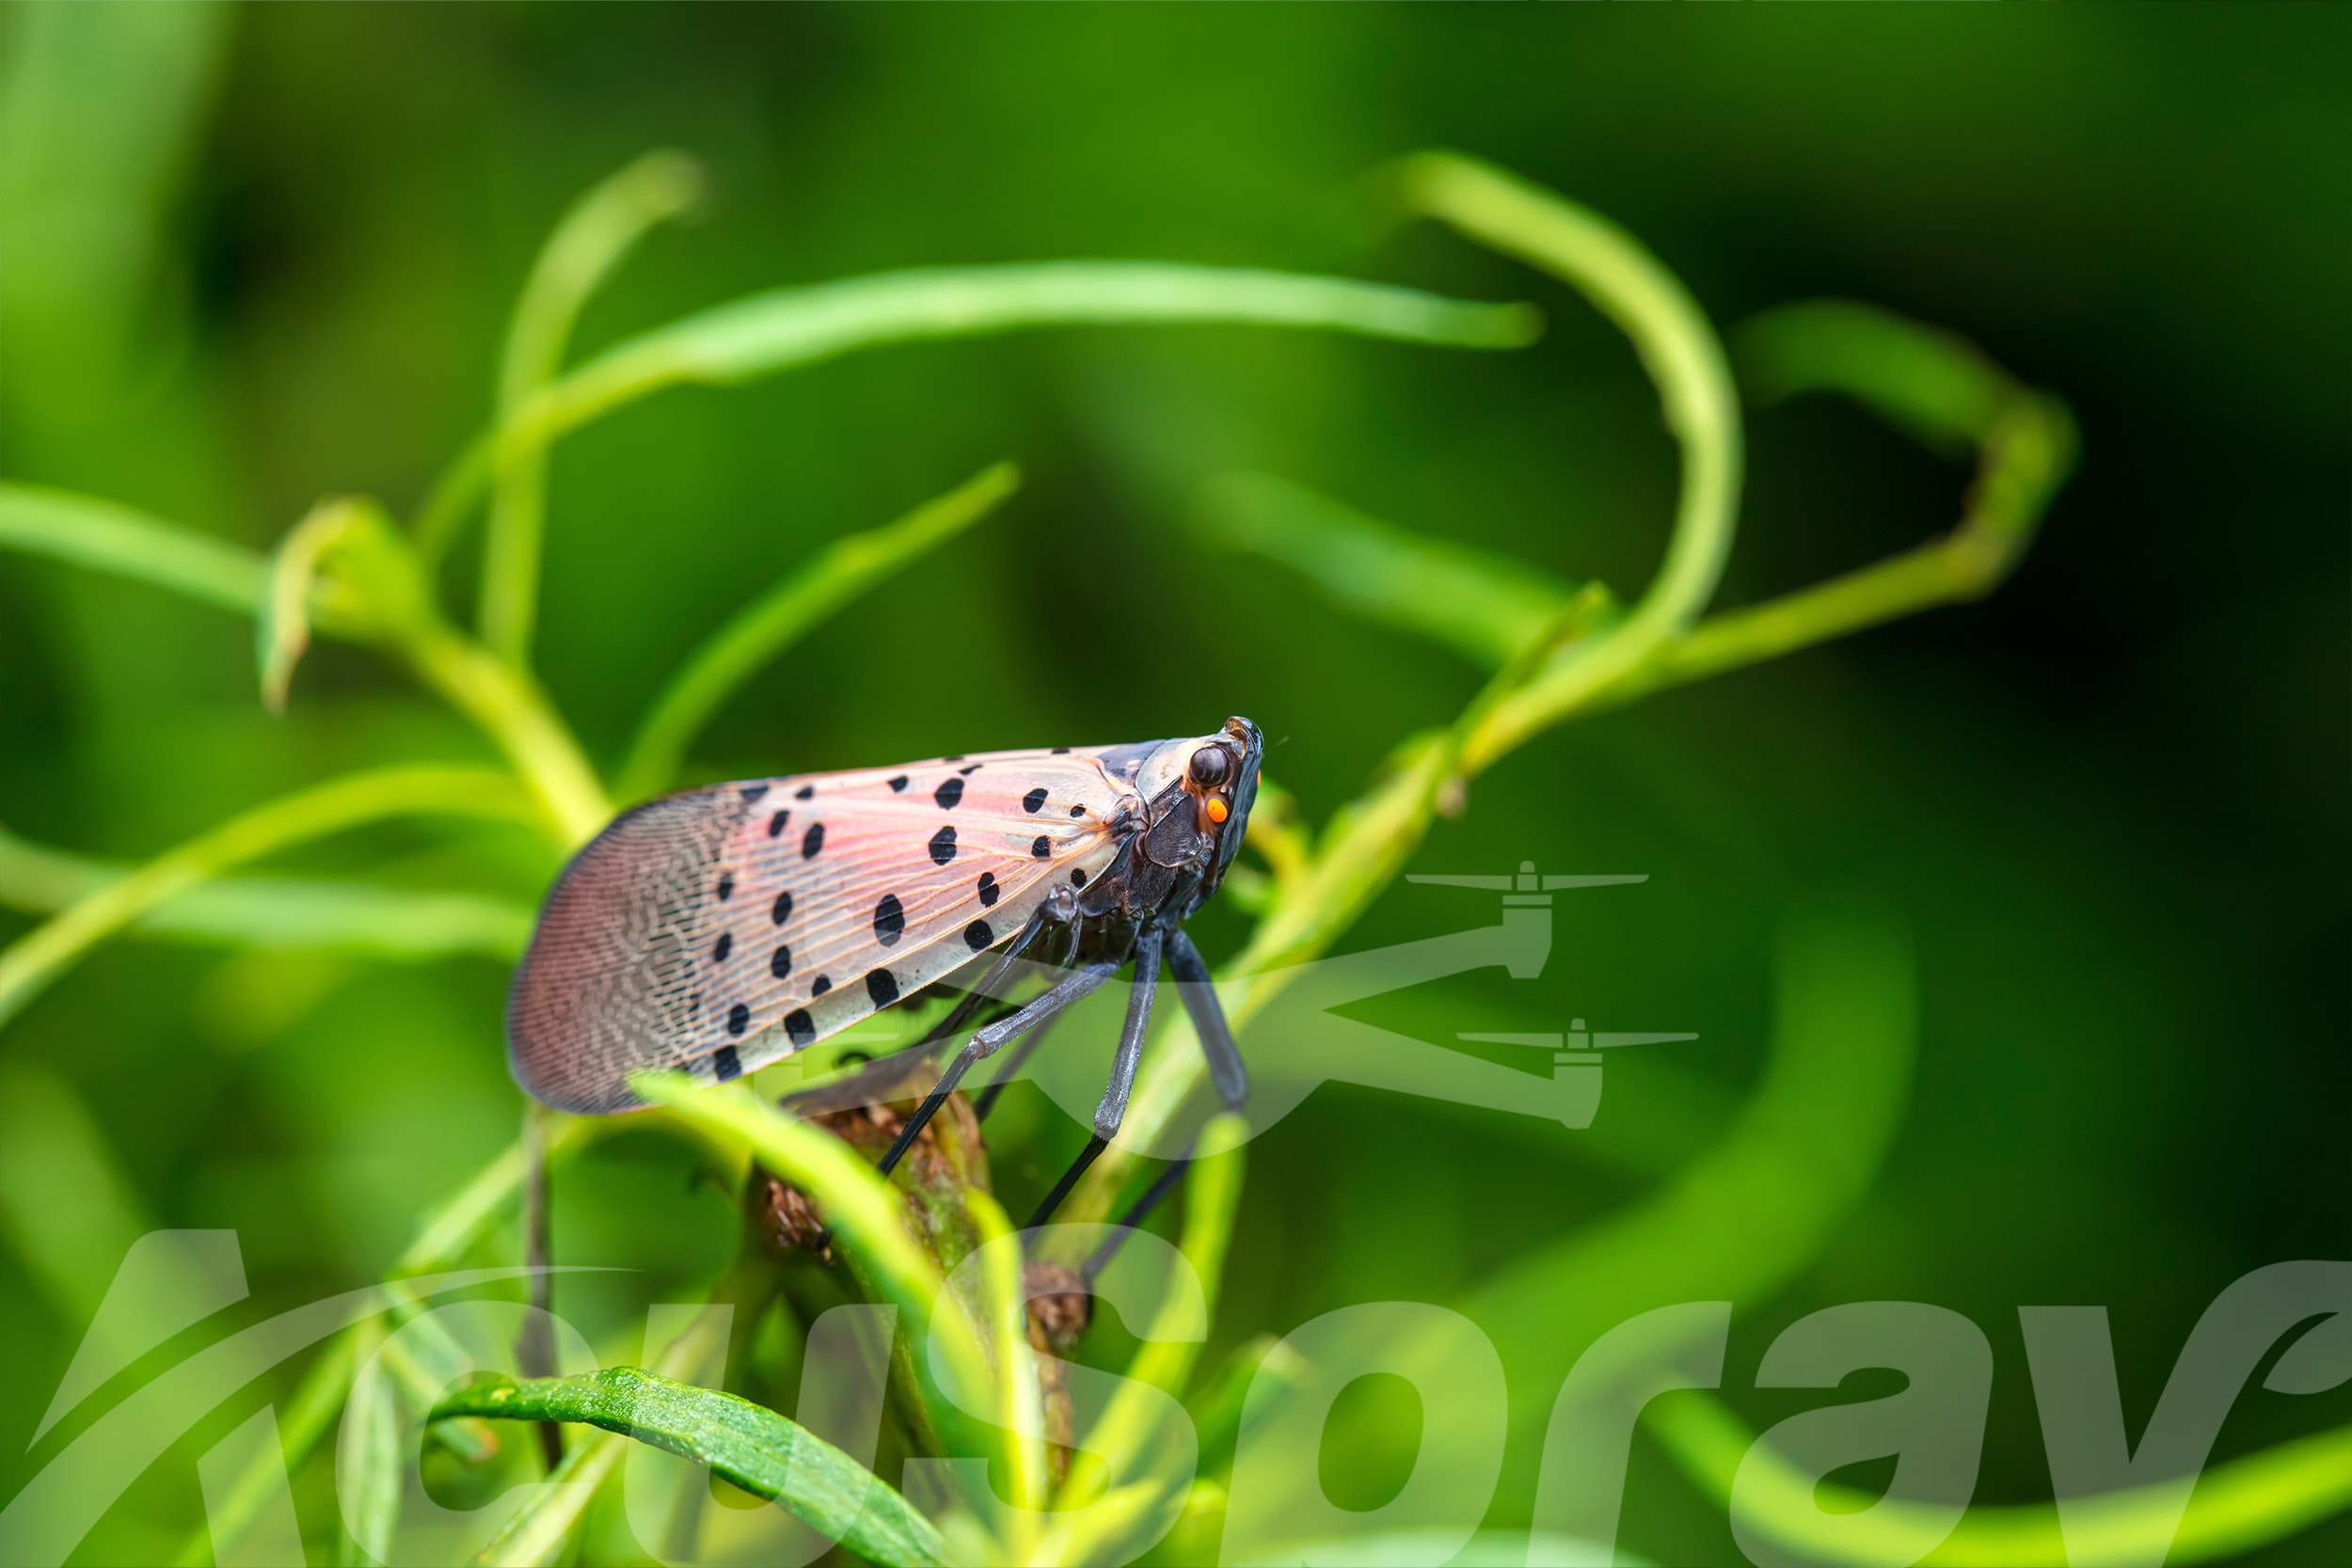 Close-up of a Spotted Lanternfly on green foliage, showcasing AcuSpray's drone technology for pest control.